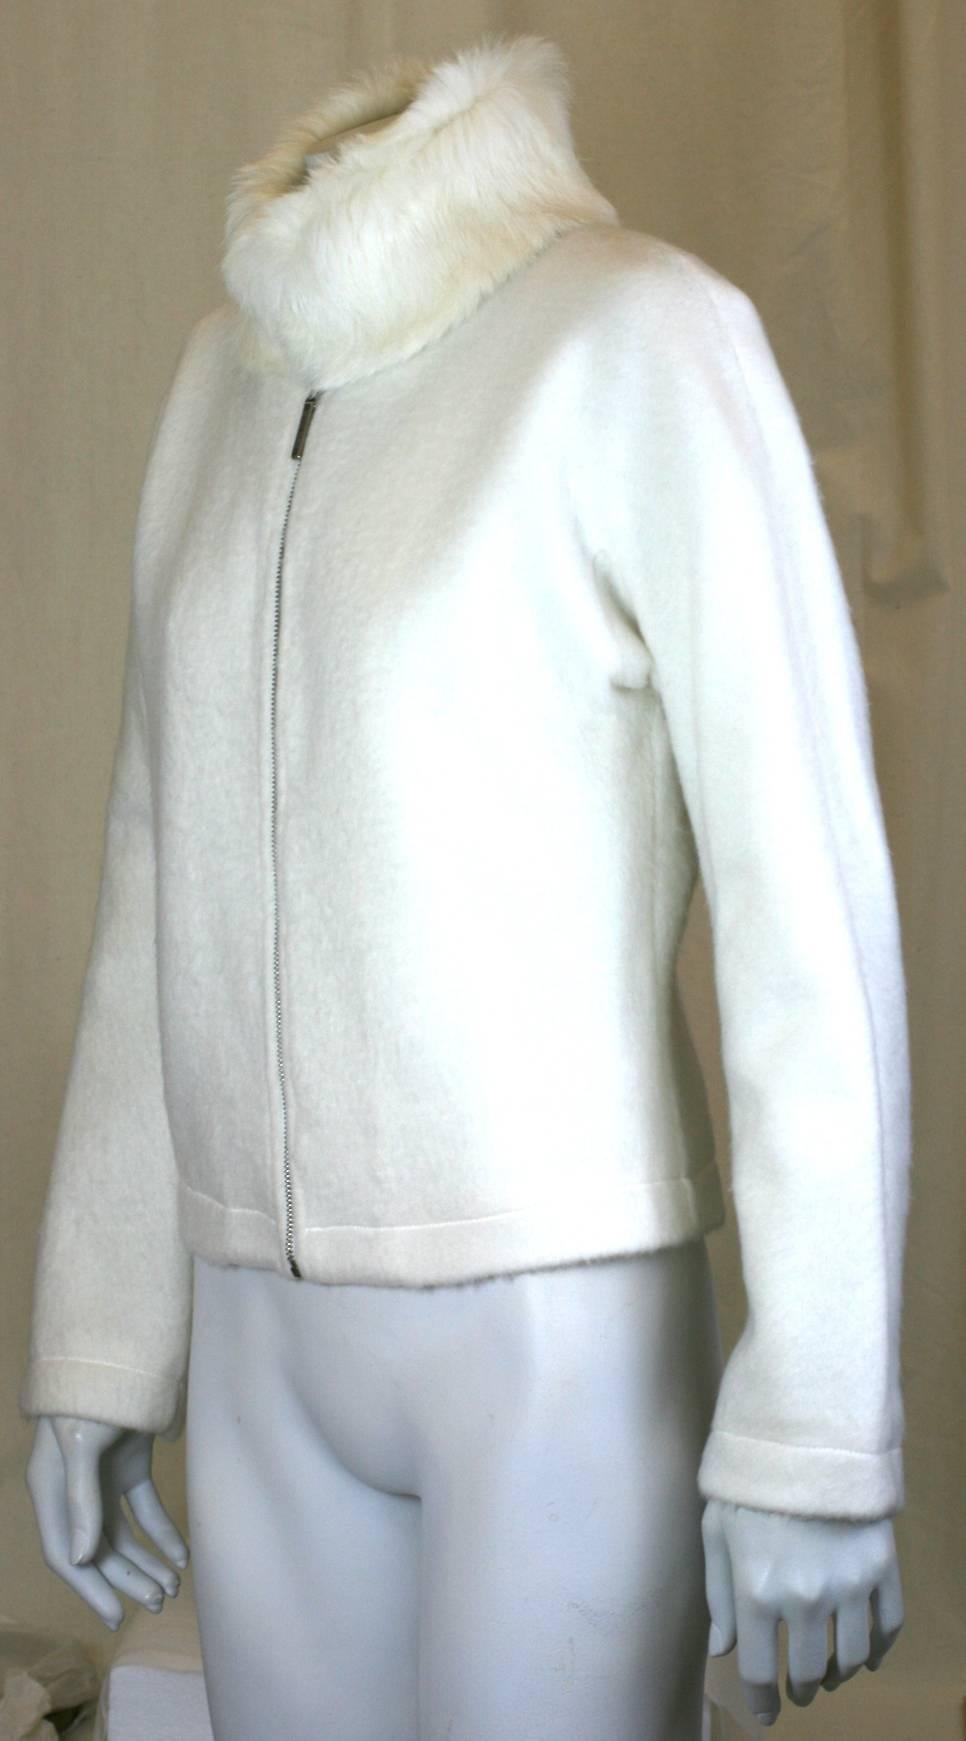 Moschino Felted White Fleece Zip front Jacket with cozy Rabbit Collar, fully satin lined. Excellent condition. 
Size 38. Small size. 1990's Italy. 

Length 21